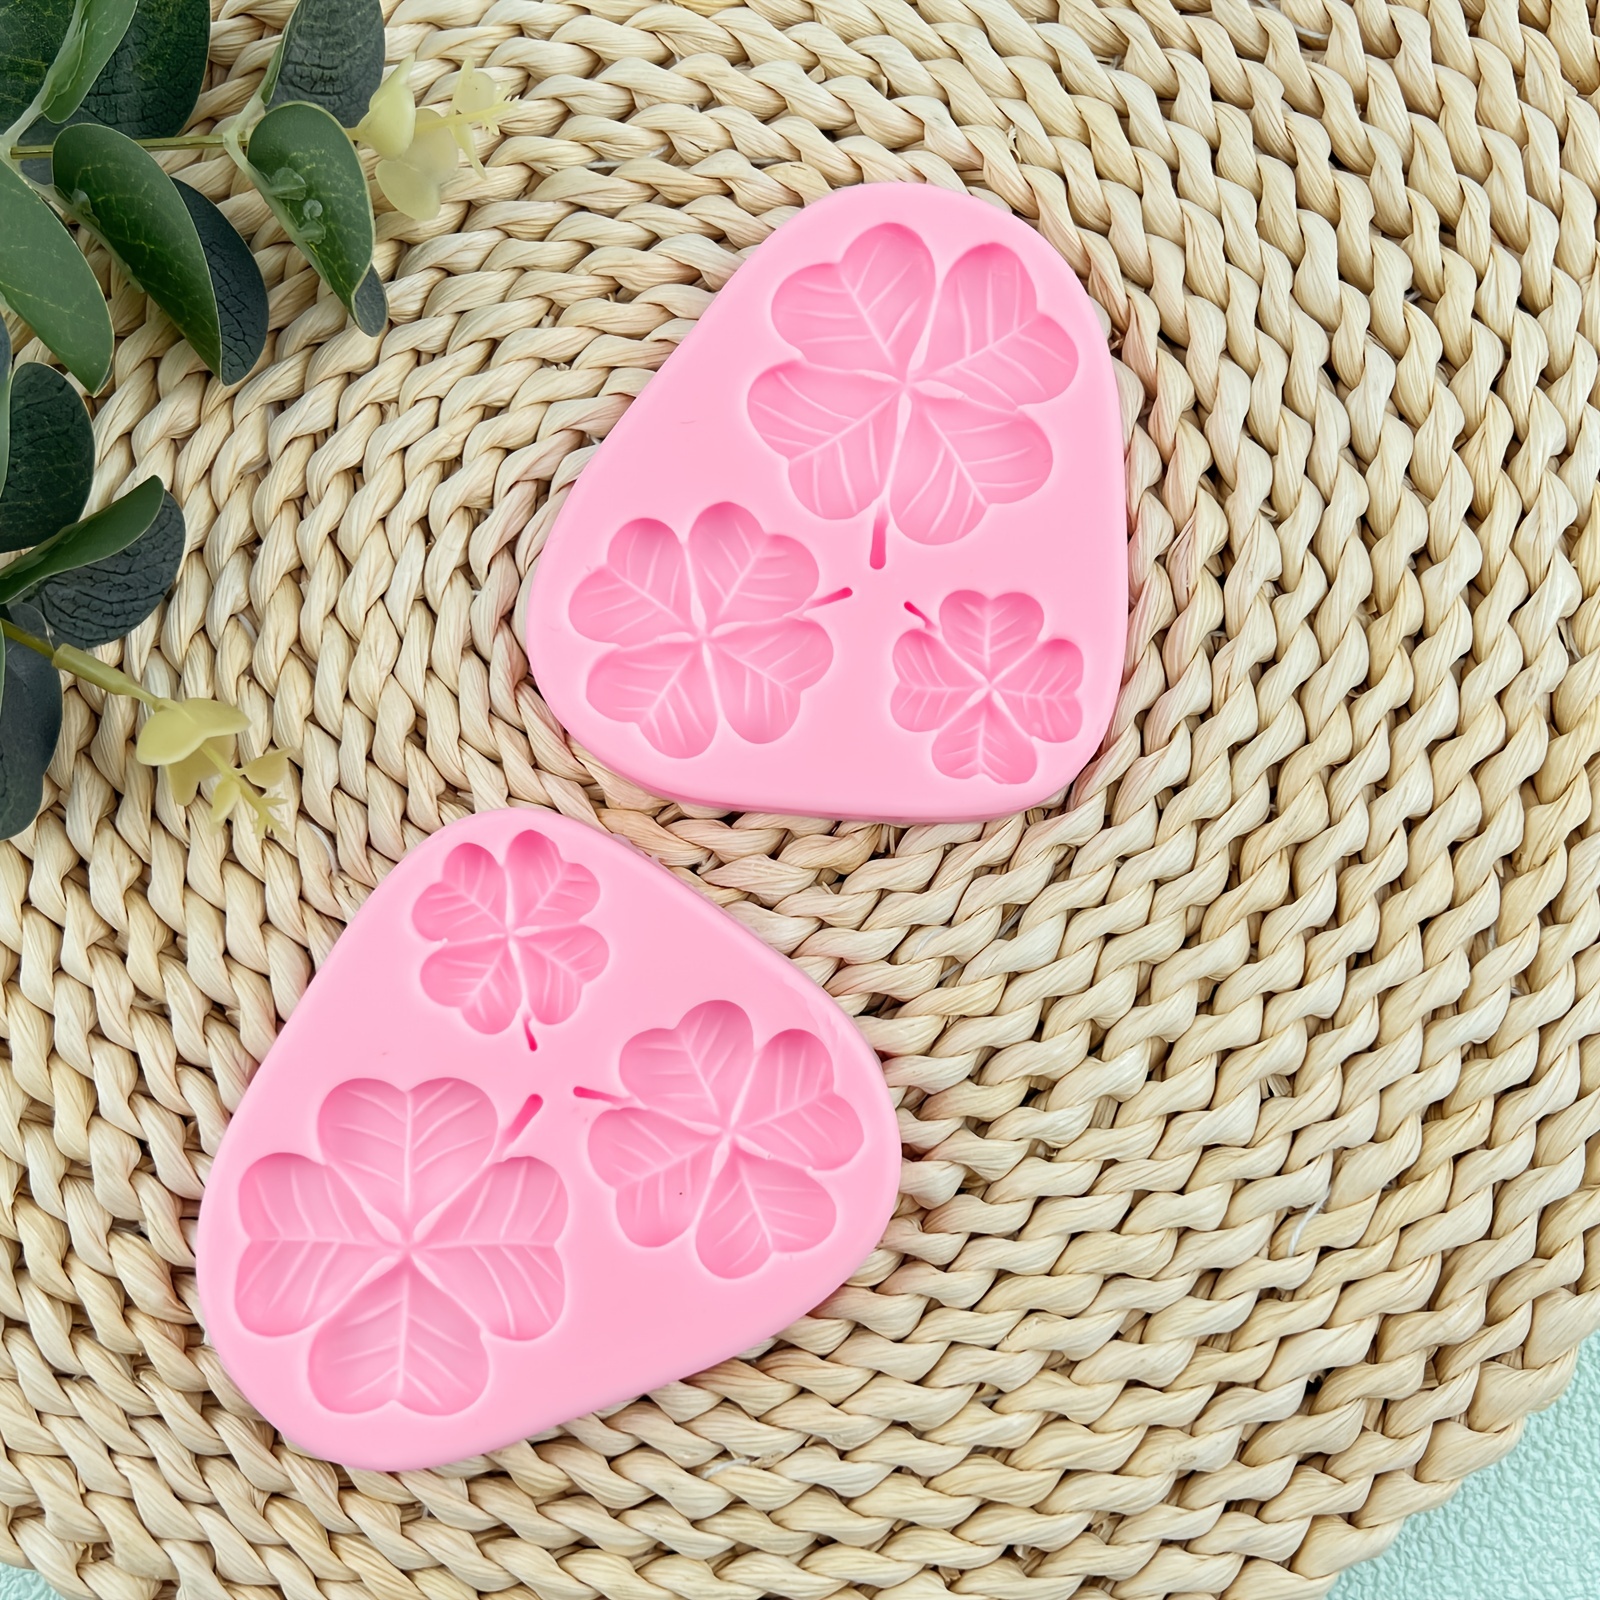  TUKE 3D Leaves Silicone Molds Flower Cake Fondant Mat Bee Leaf  Pastry Moulds Rose Impression Chocolate Hollow Lace Mold  (Leaf_8.2x3.8x0.12inch_I) : Home & Kitchen